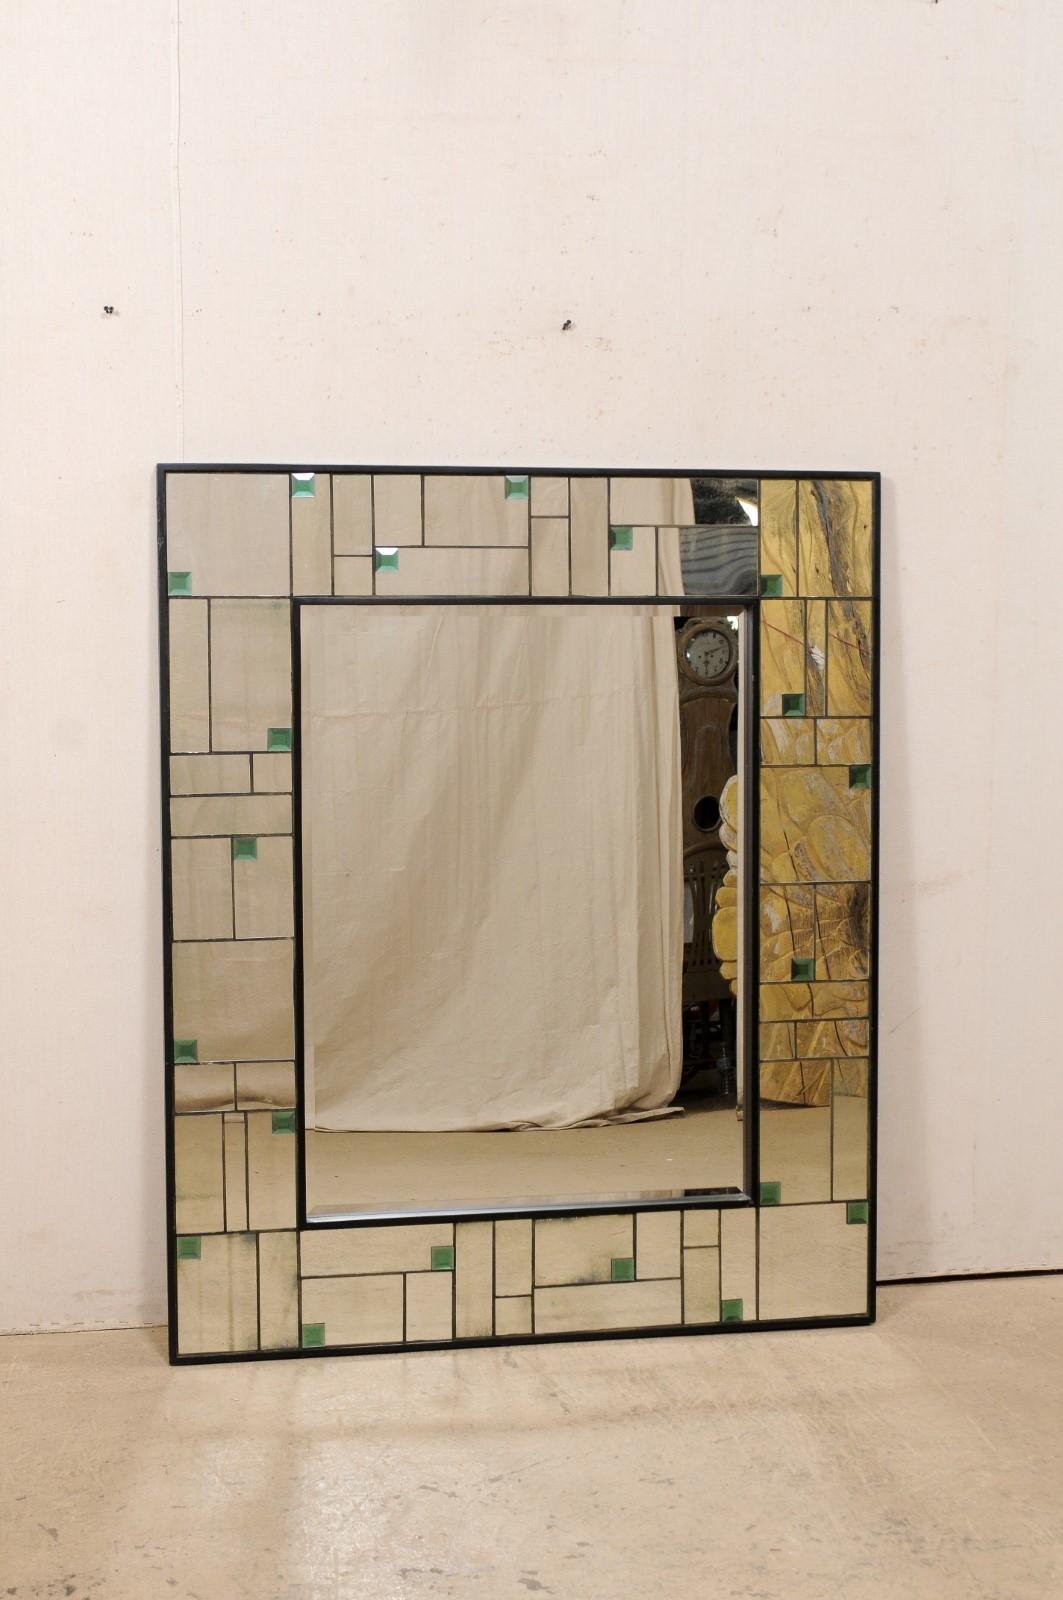 A vintage American larger-sized mirror with glass frame with green accents. This rectangular shaped mirror stands approximately 58